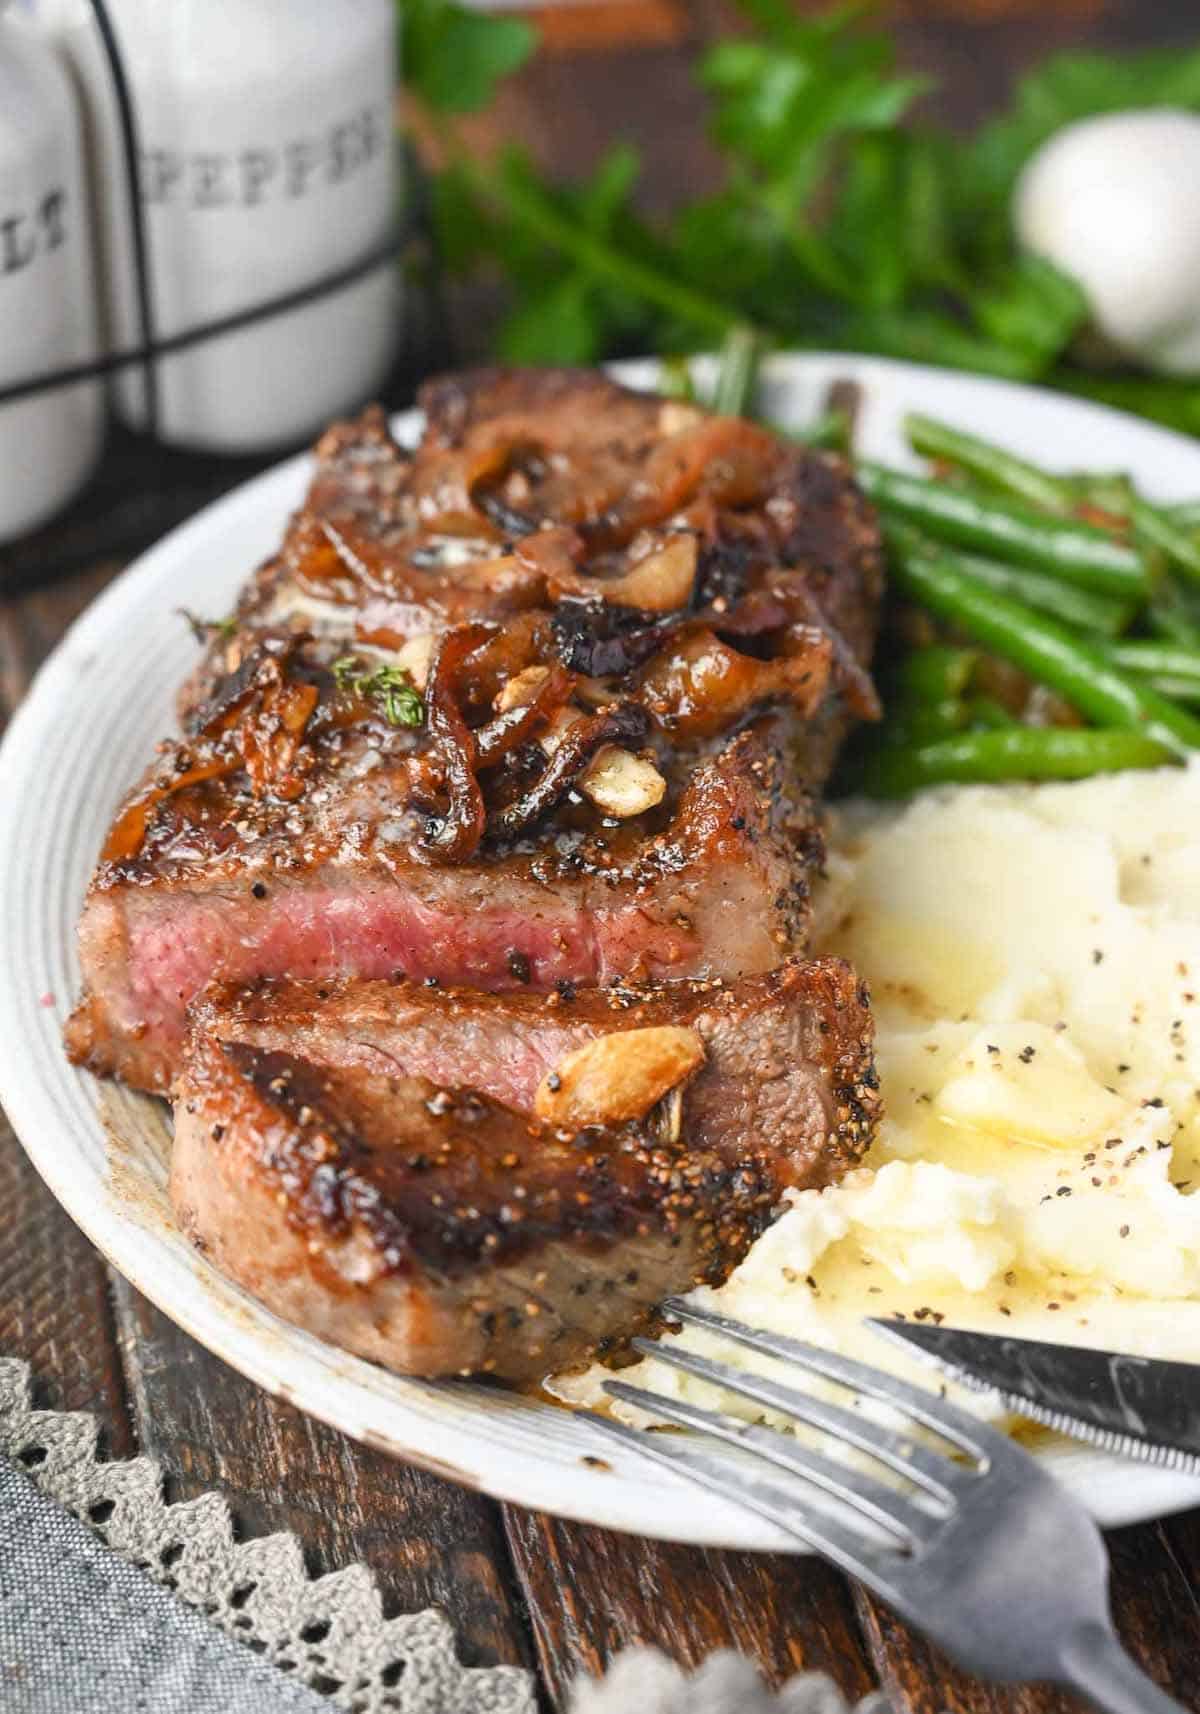 Garlic Rib Eye Steak with garlic is pan-seared to perfection with the perfect crust. Basted in butter, garlic, and fresh herbs, and topped with those sweet caramelized onions, and comes together in under 20 minutes.